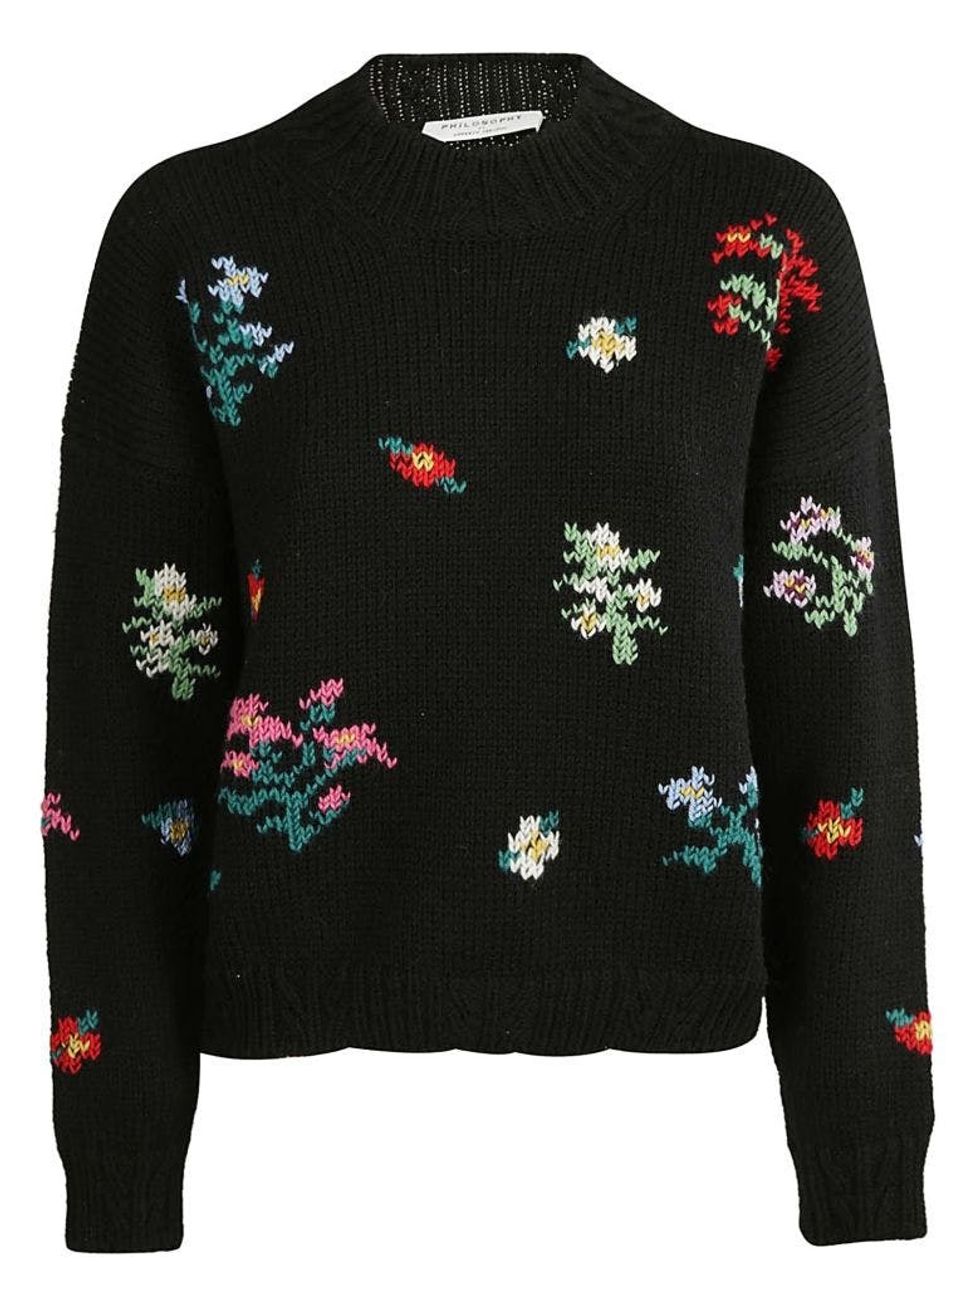 16 Bold Winter Floral Fashion Finds to Shop Now - Brit + Co